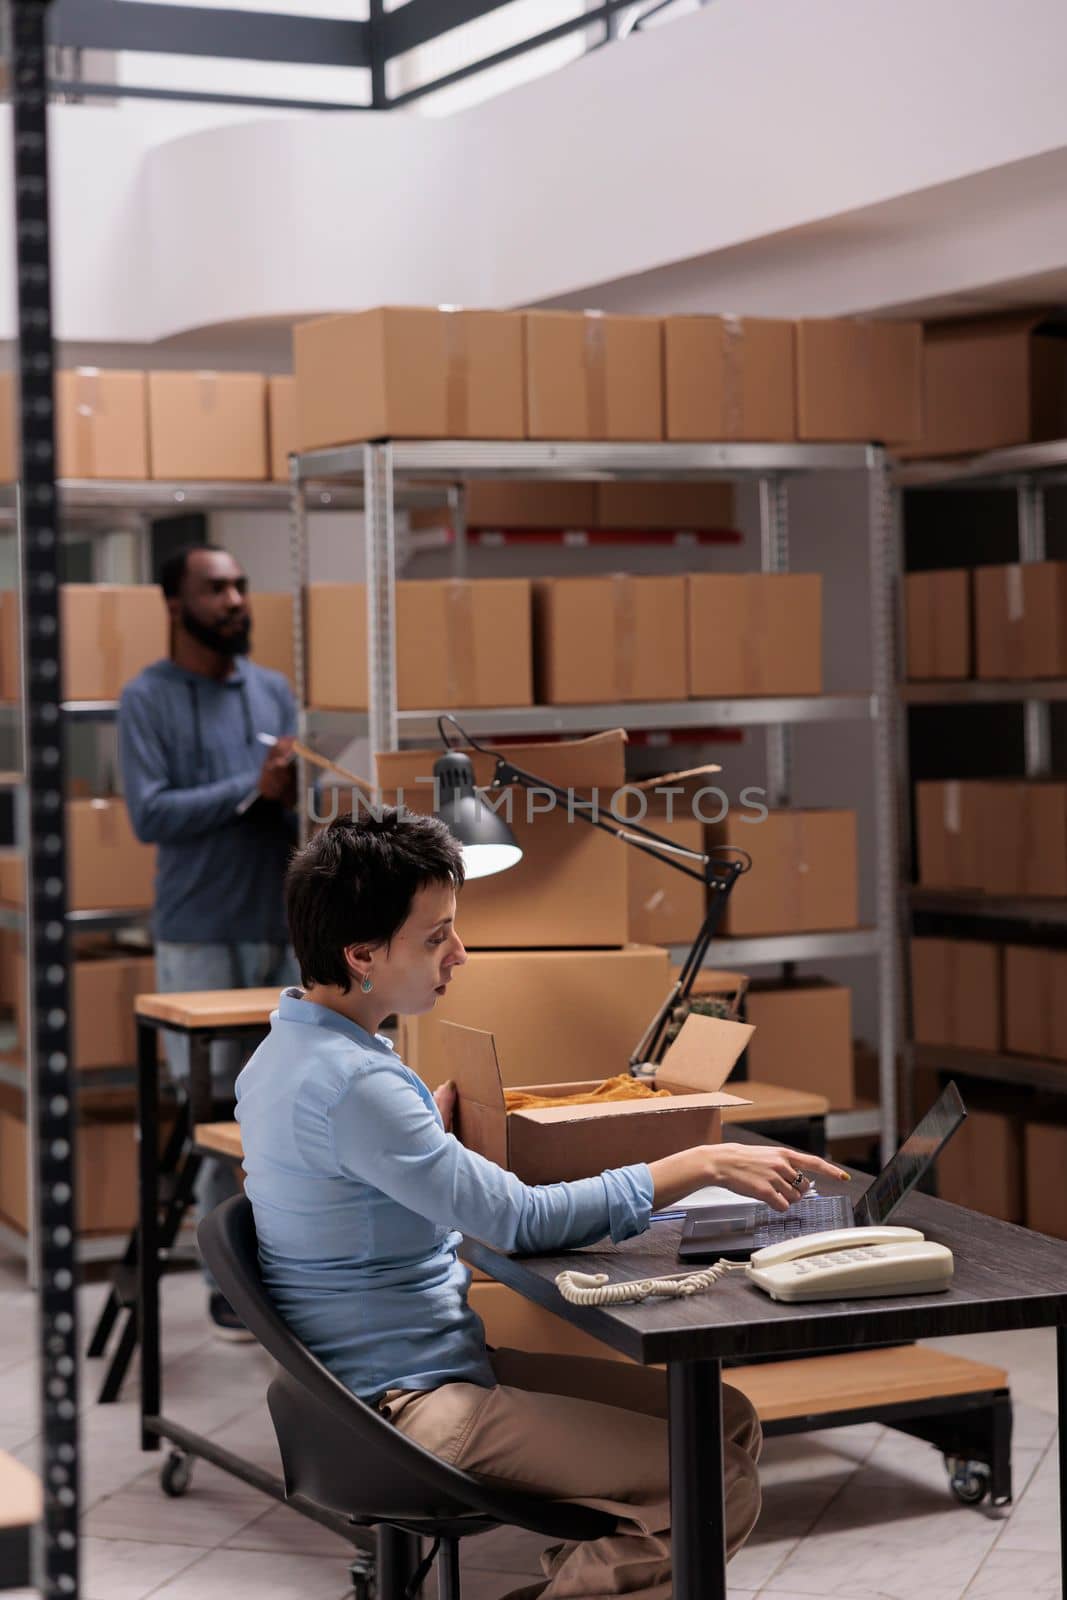 Woman supervisor looking at cargo stock on laptop computer while checking fashion blouse status before start preparing clients packages. Employee working at warehouse delivery department